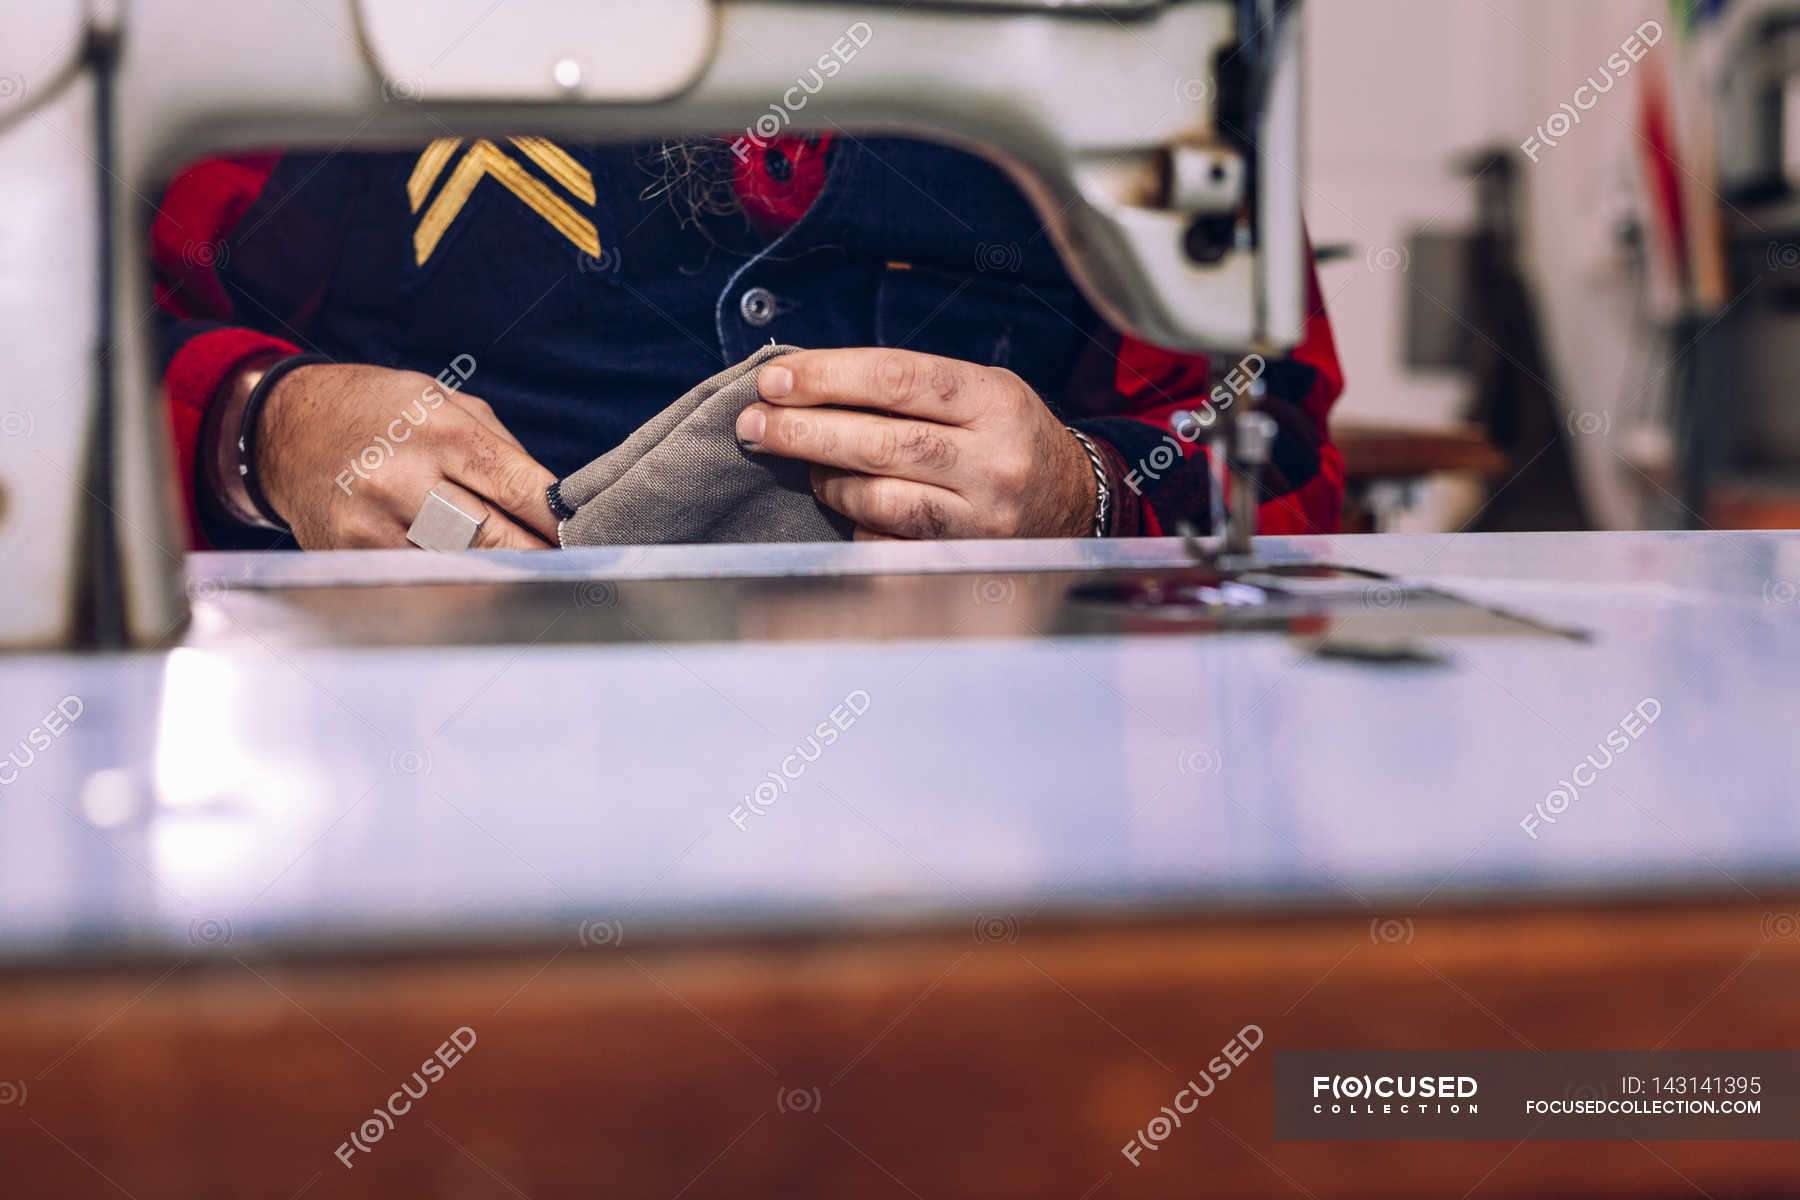 Male worker holding bag pocket — Stock Photo | #143141395